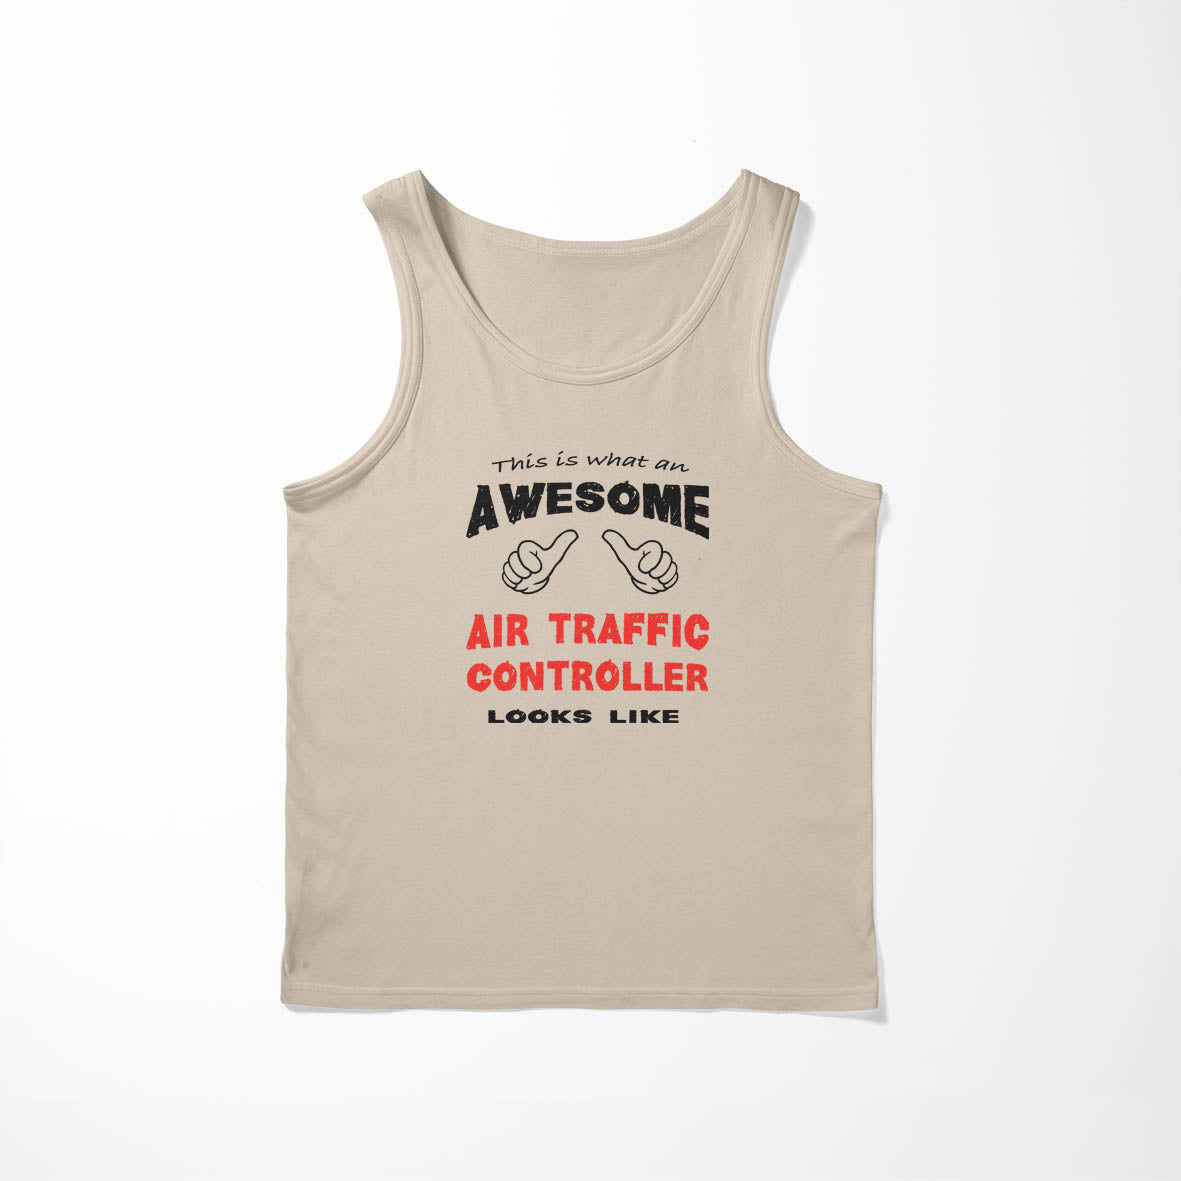 This is what an Awesome Air Traffic Controller Look Like Tank Tops